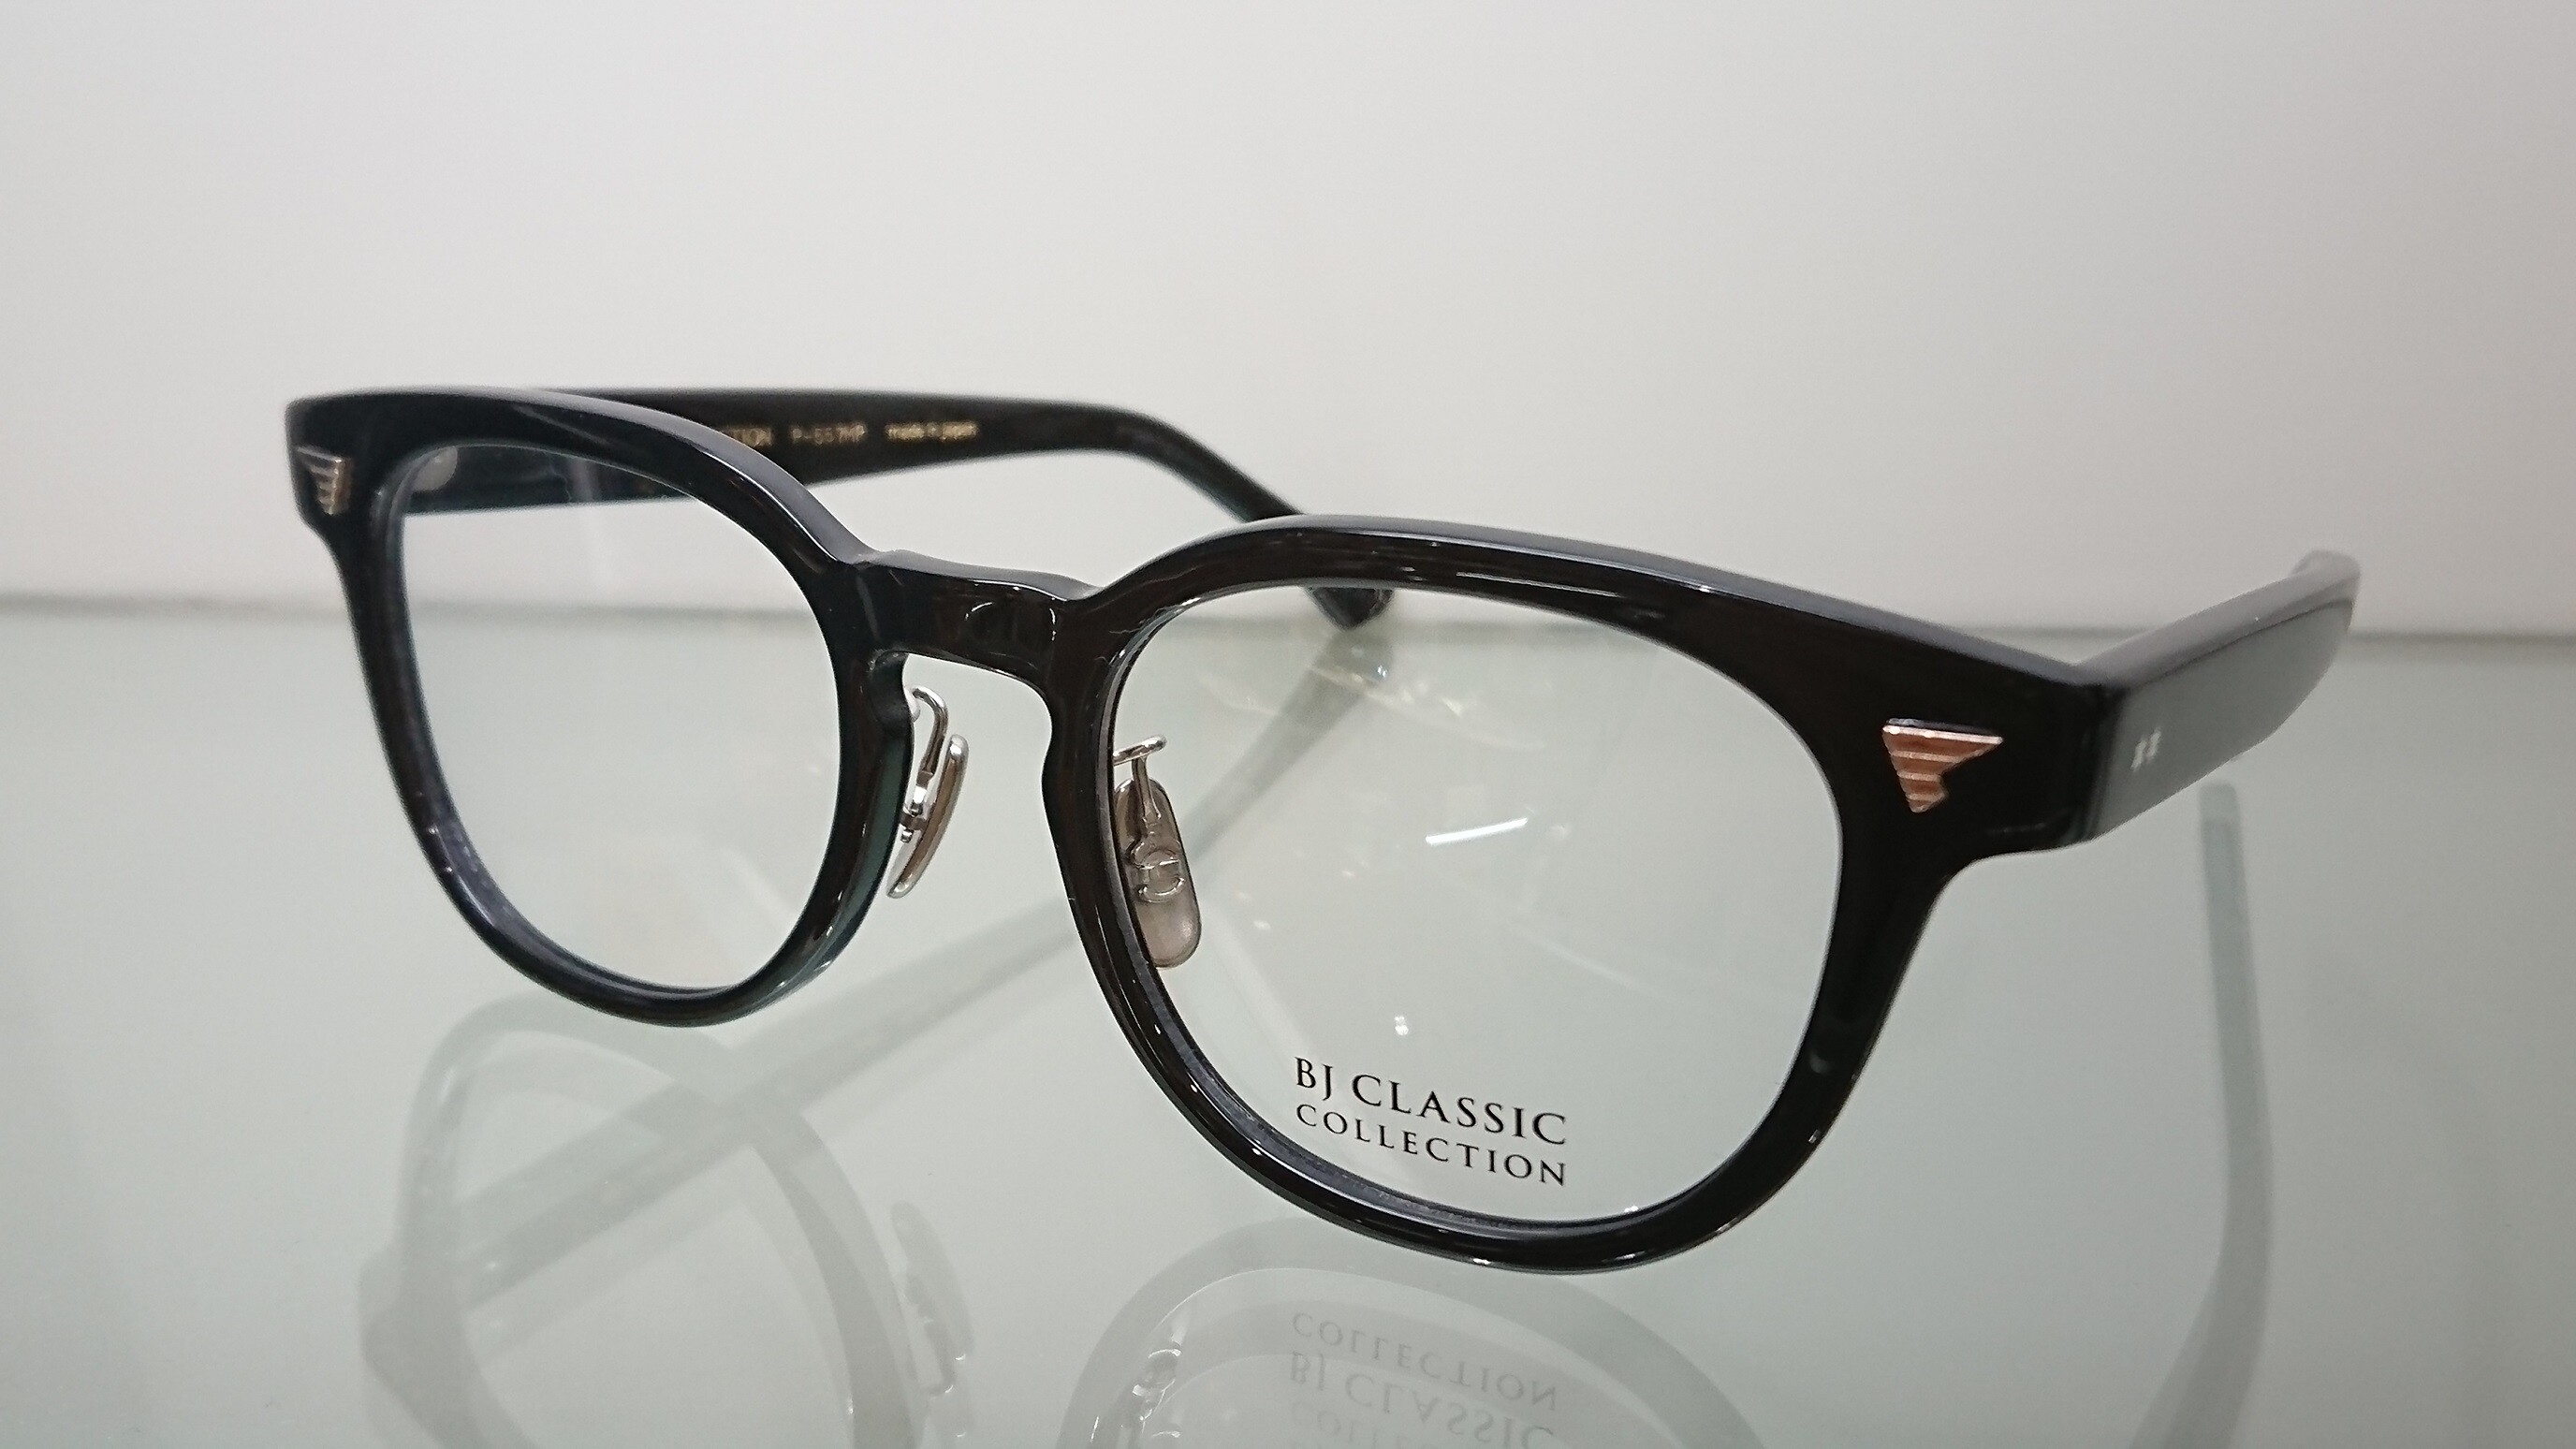 BJ CLASSIC COLLECTION トランクショー＆新作紹介